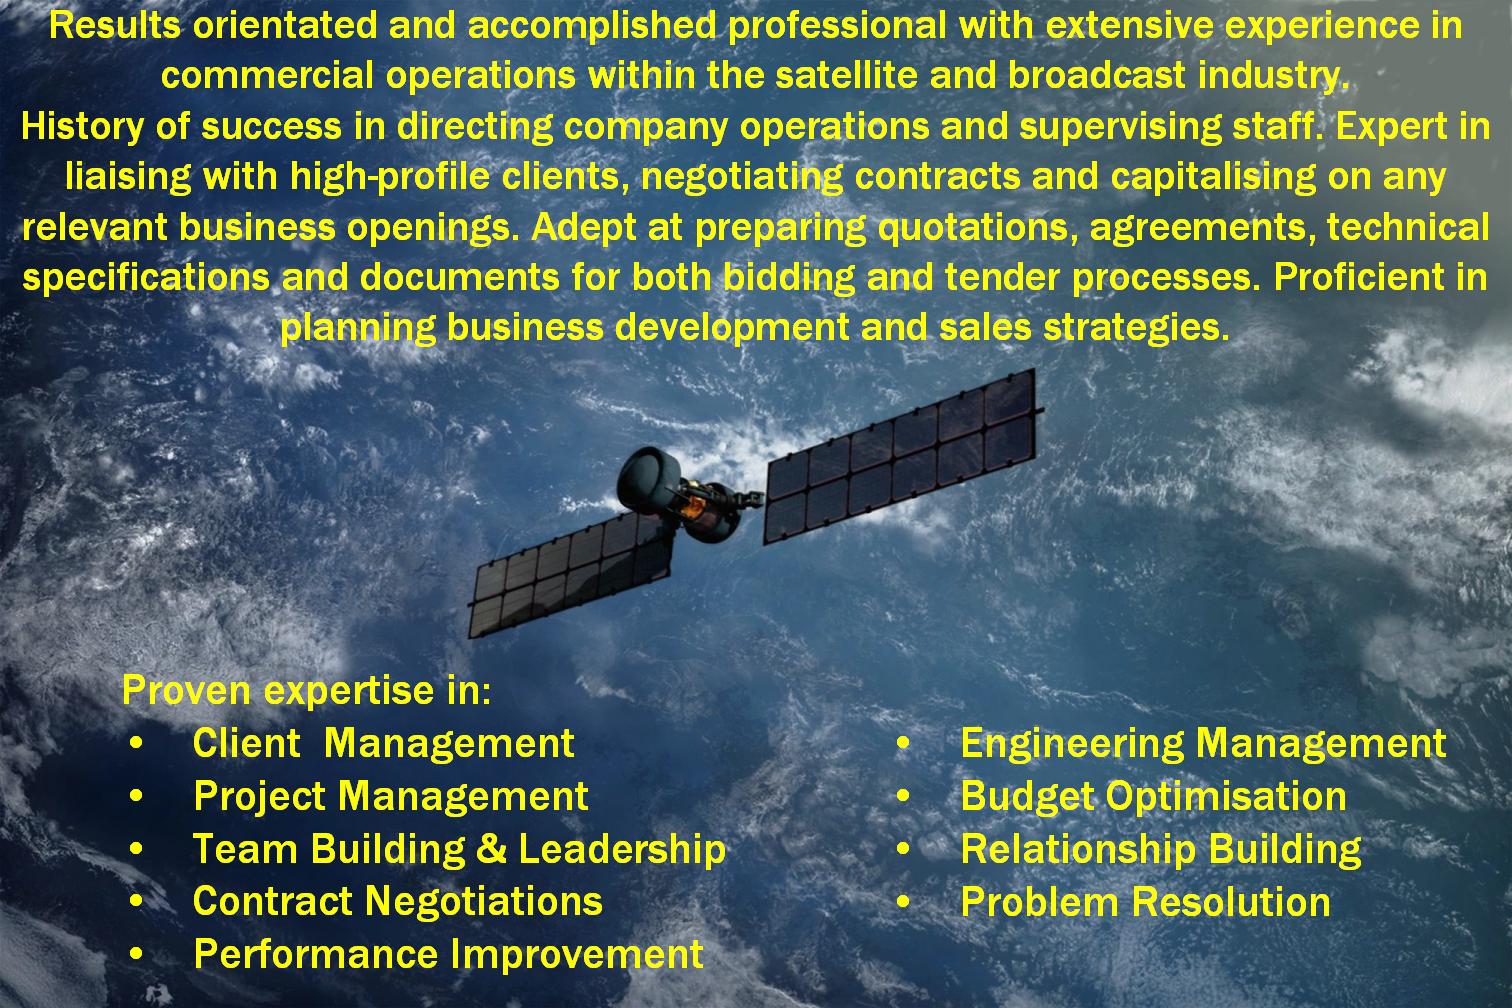 satellite Over The World with text describing servies, roles and expertise.